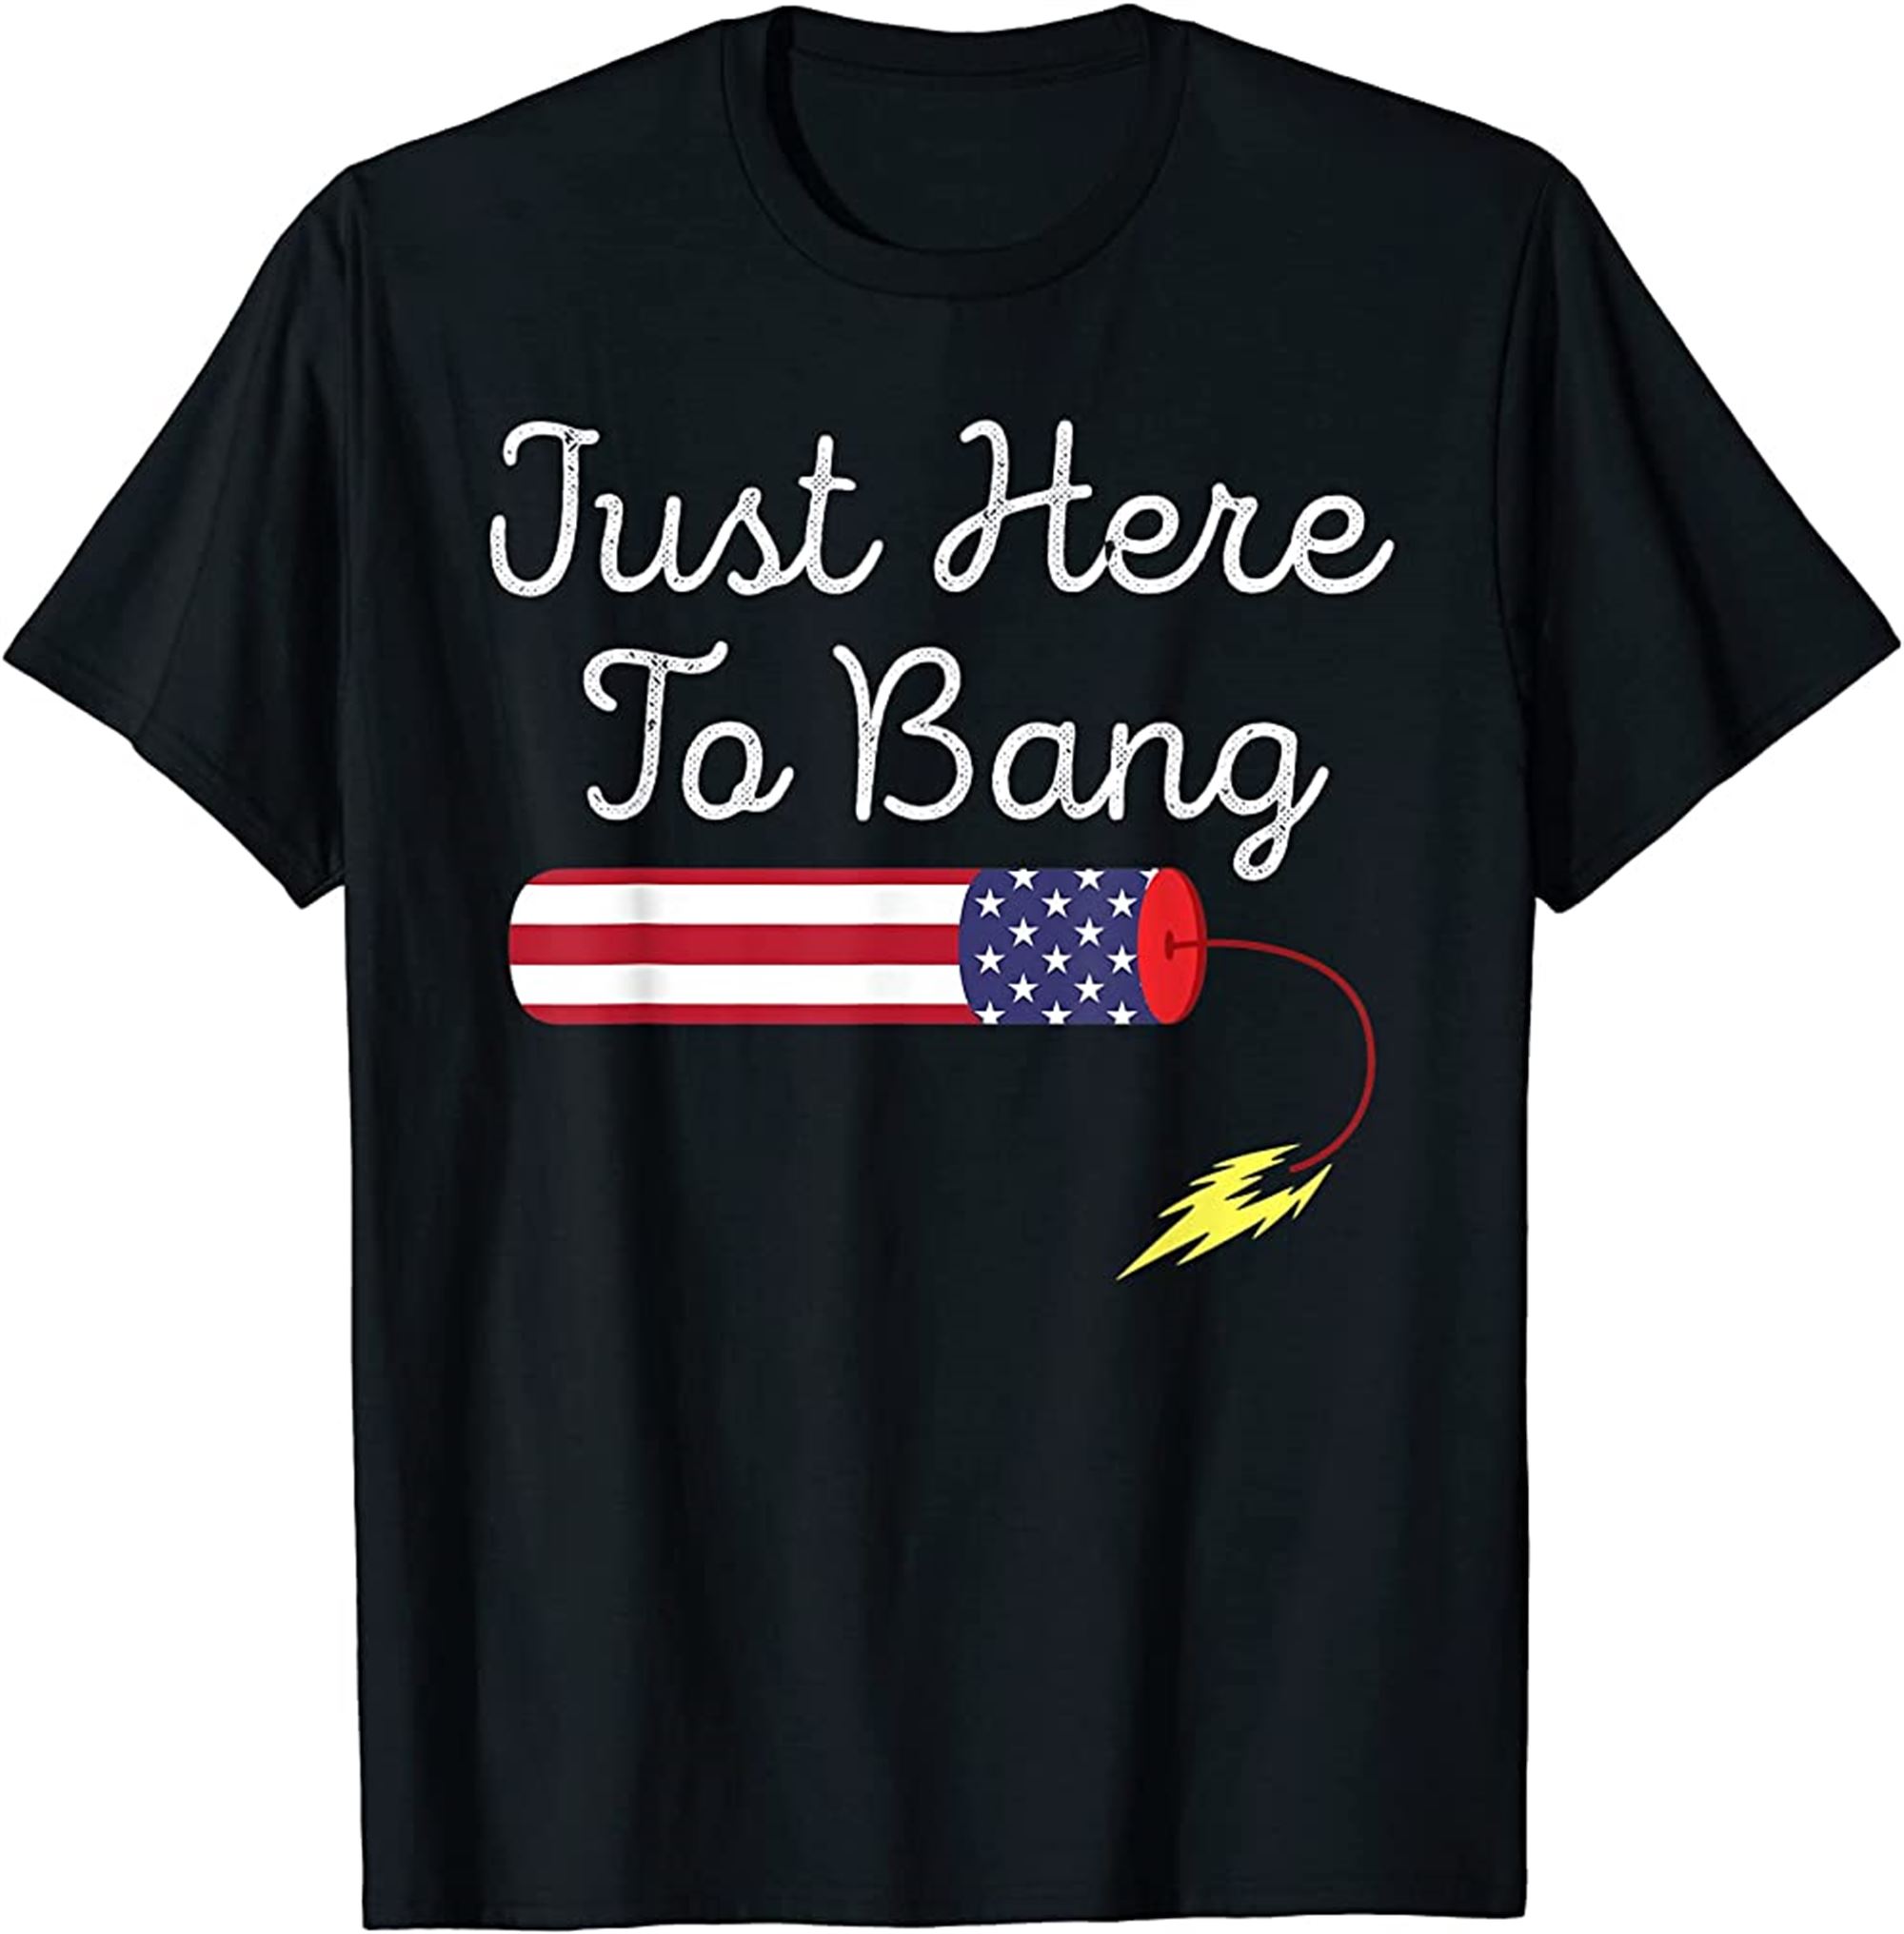 Funny Fourth Of July 4th Of July Im Just Here To Bang T-shirt Full Size Up To 5xl